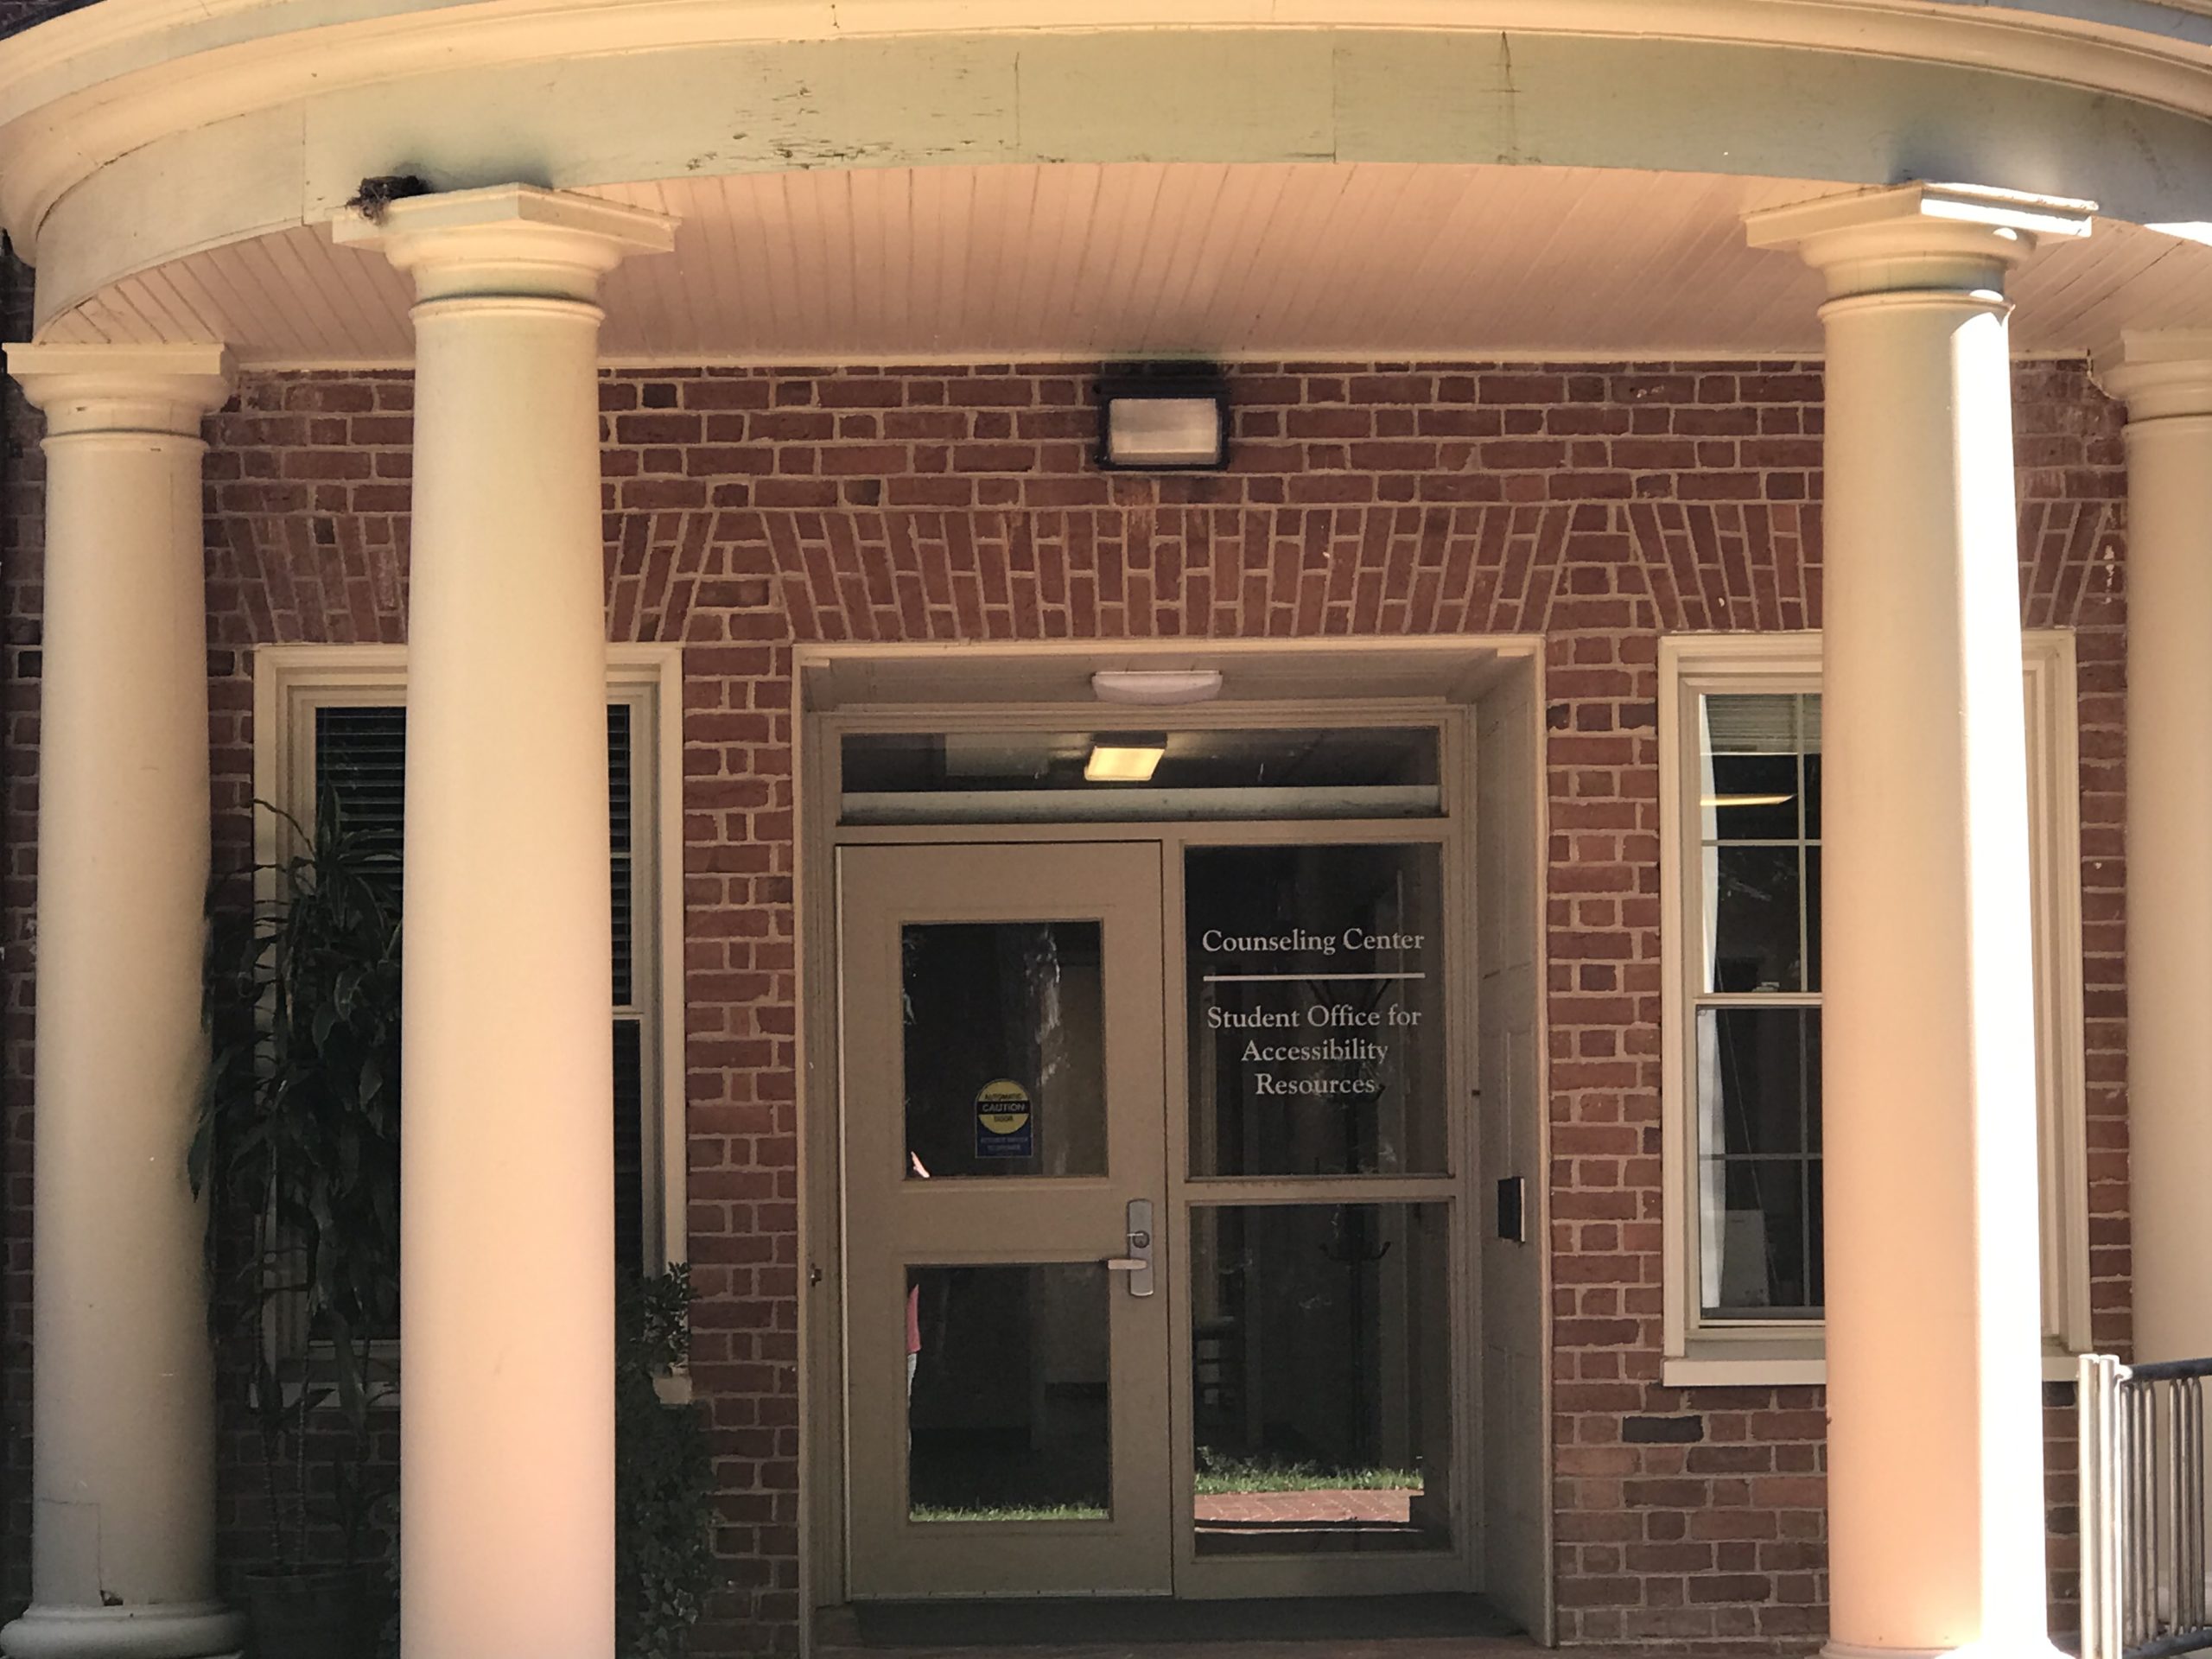 Counseling center entrance